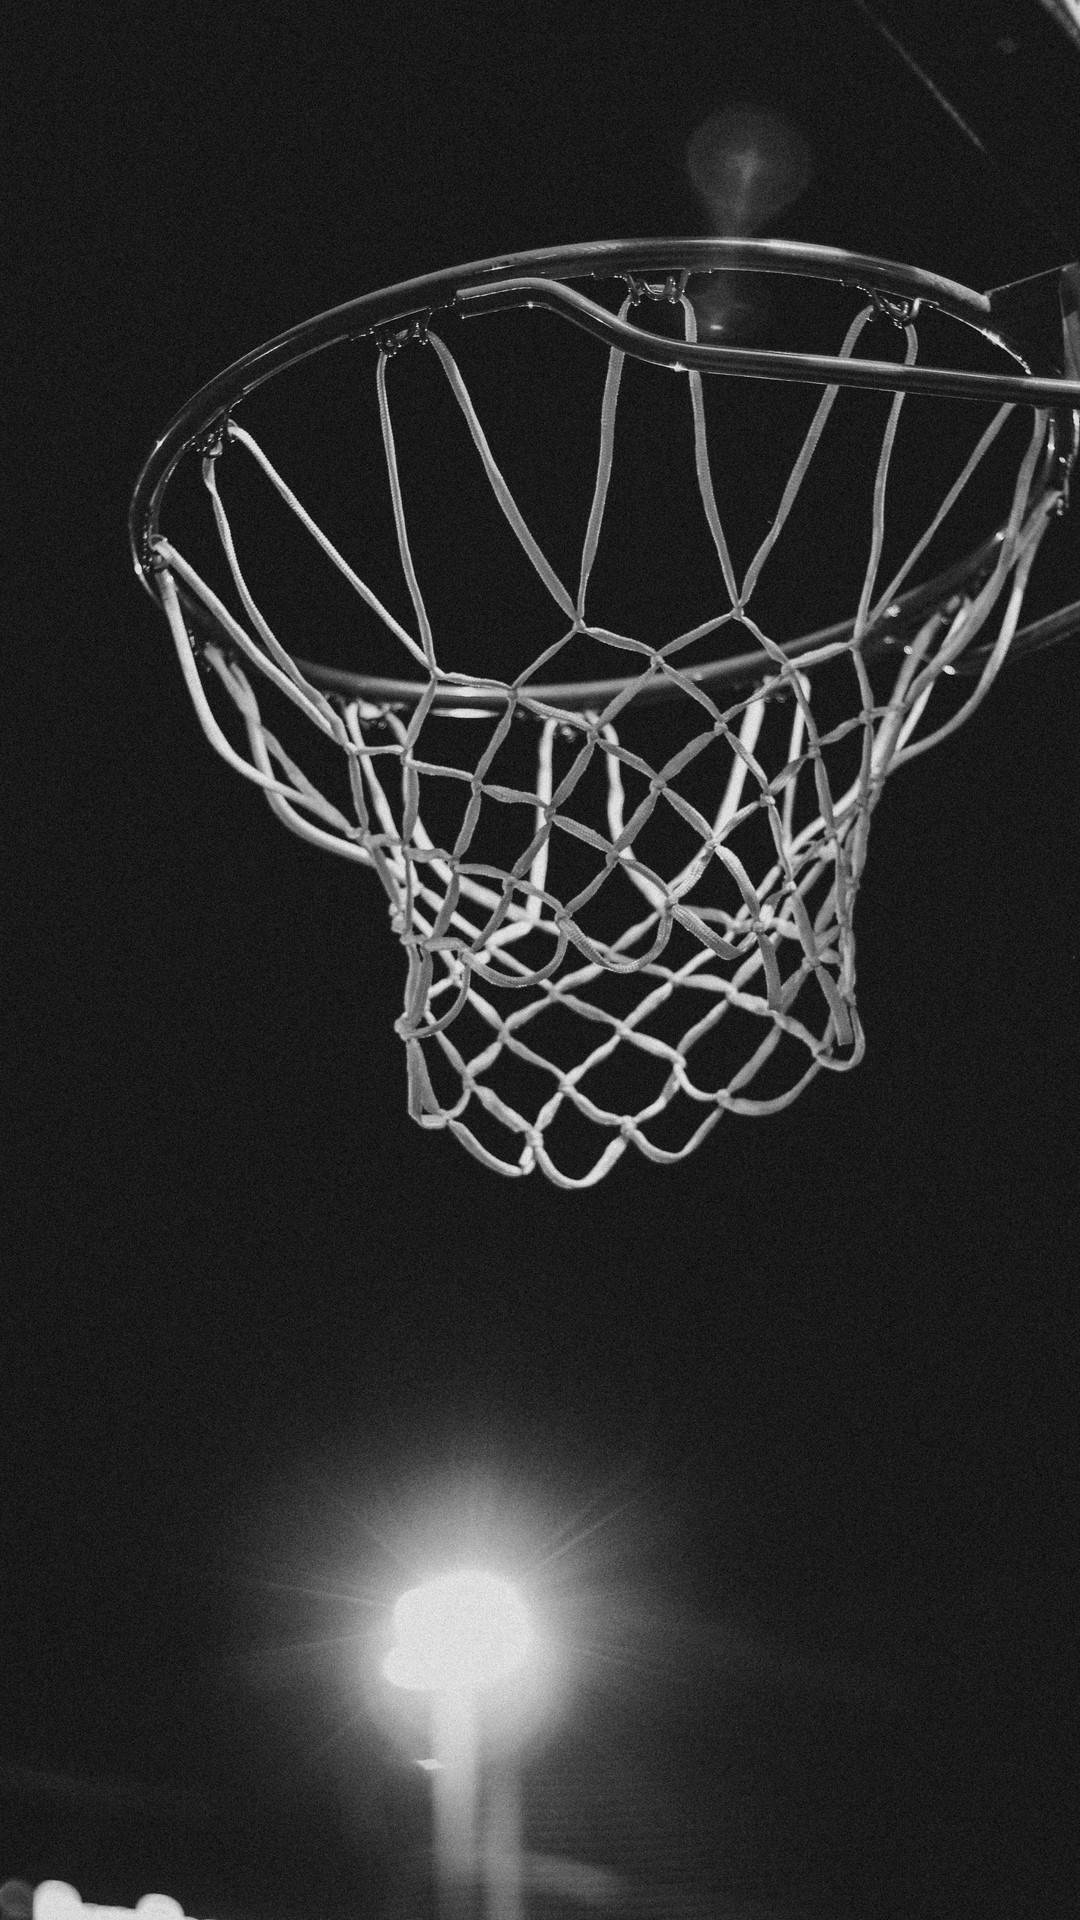 Download Aesthetic Basketball Ring Cool Basketball iPhone Wallpaper